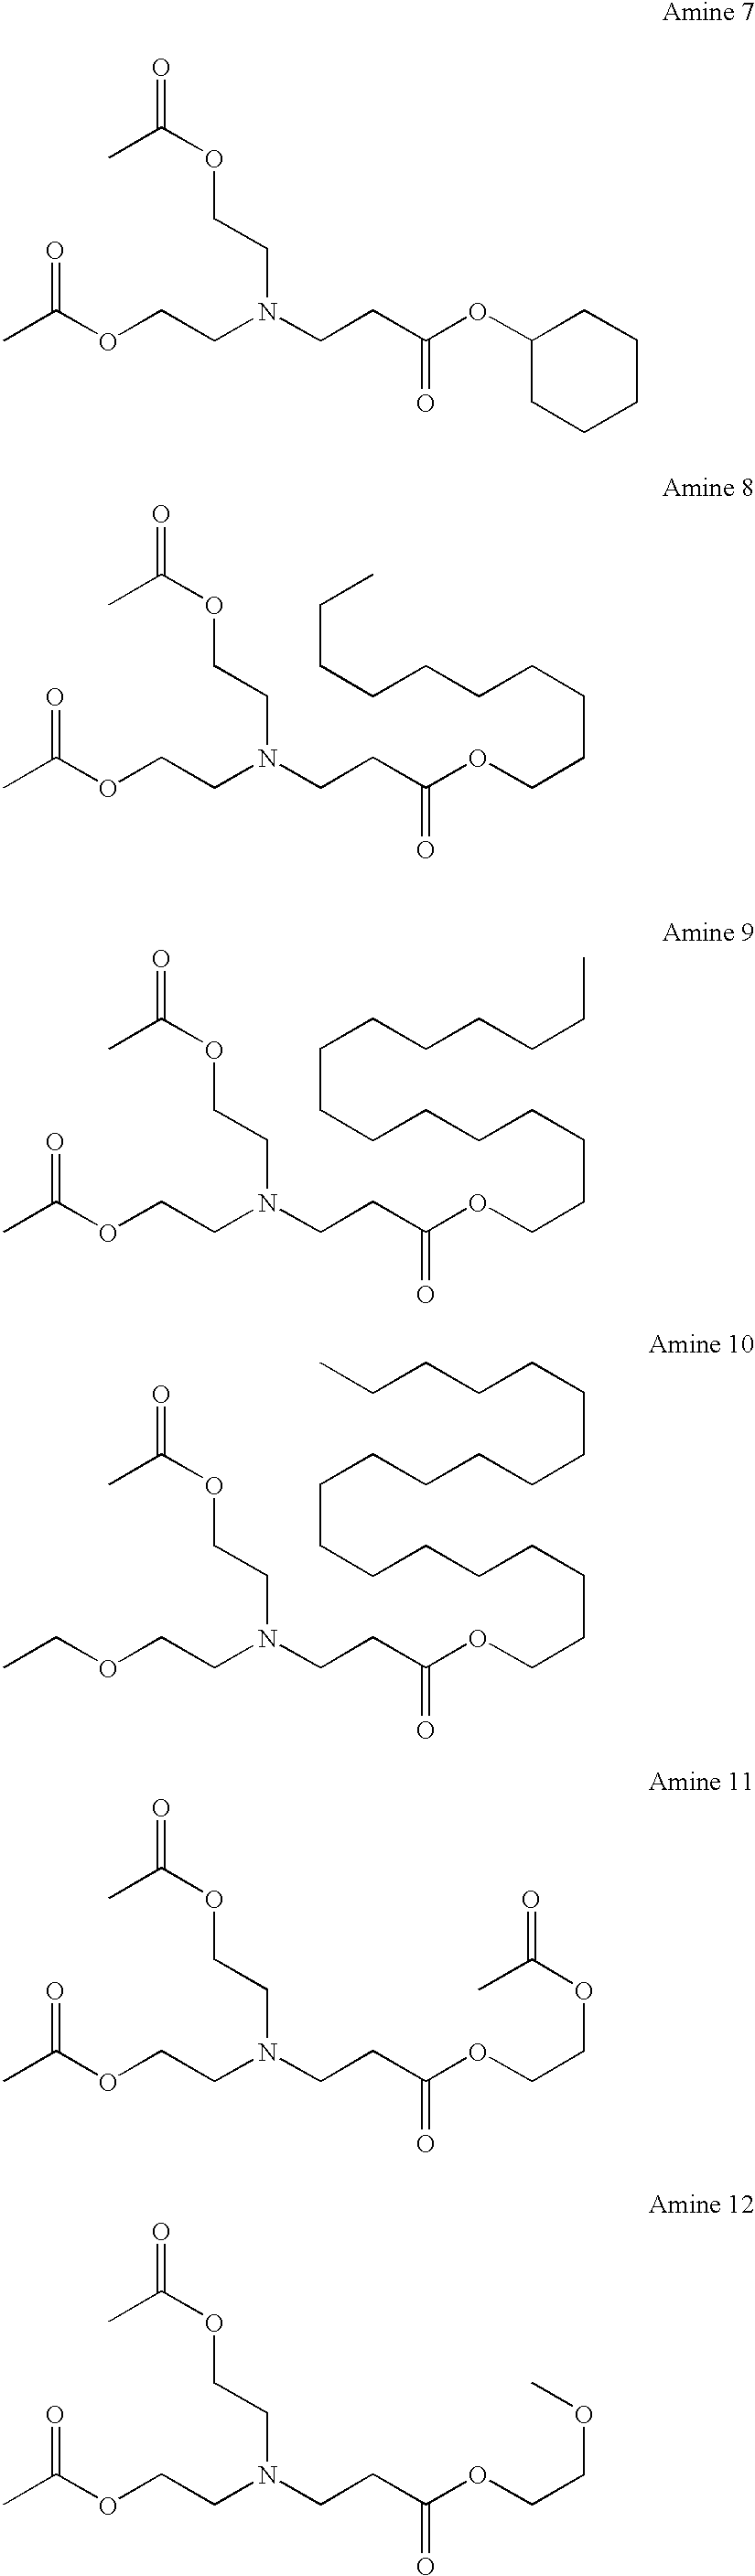 Tertiary amine compounds having an ester structure and processes for preparing same